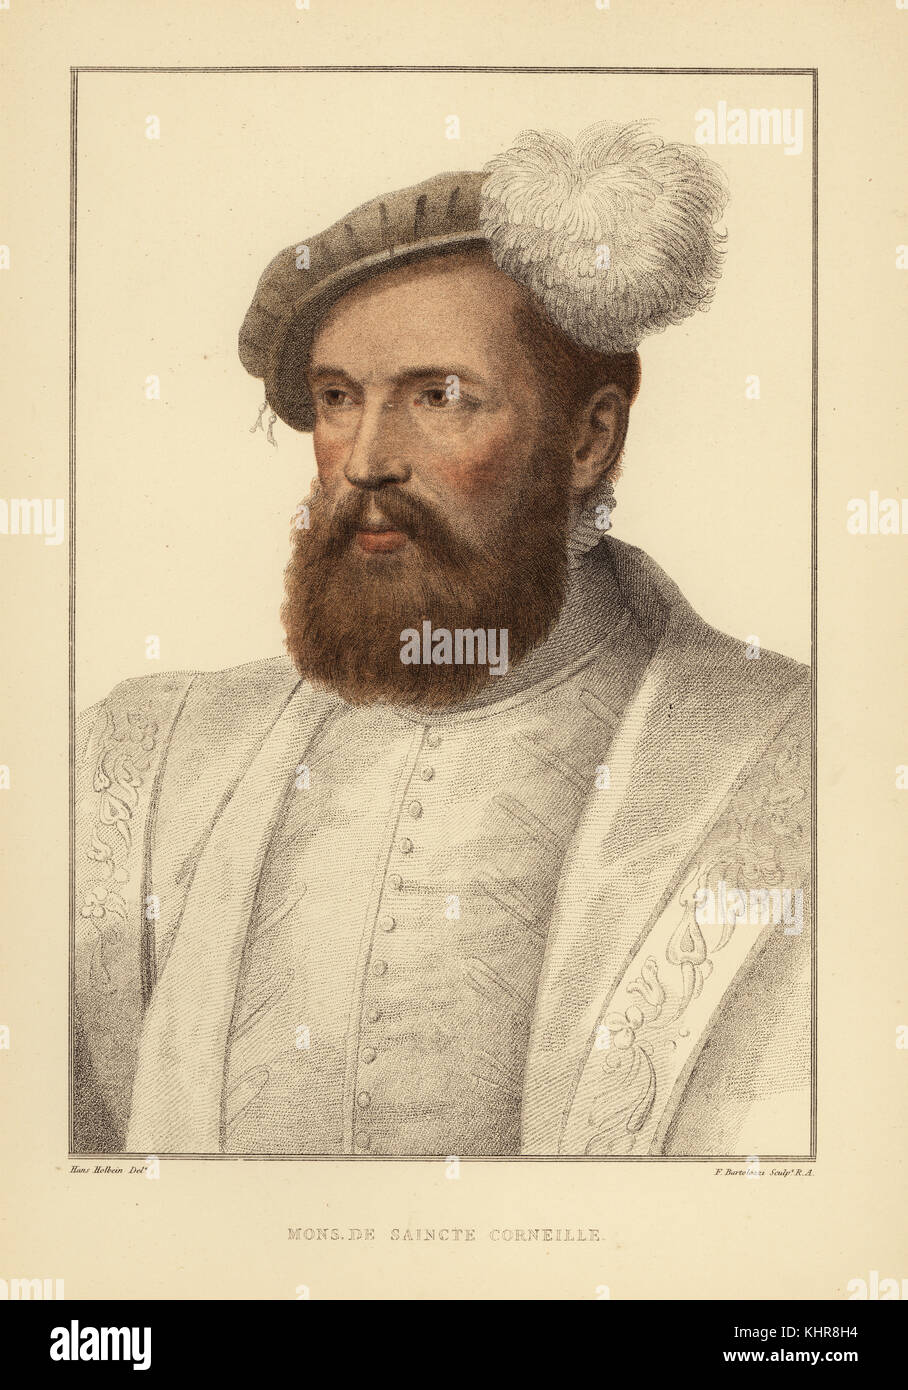 Monsieur de Saincte Corneille, French man at the court of King Henry VIII. Handcoloured copperplate engraving by Francis Bartolozzi after Hans Holbein from Facsimiles of Original Drawings by Hans Holbein, Hamilton, Adams, London, 1884. Stock Photo